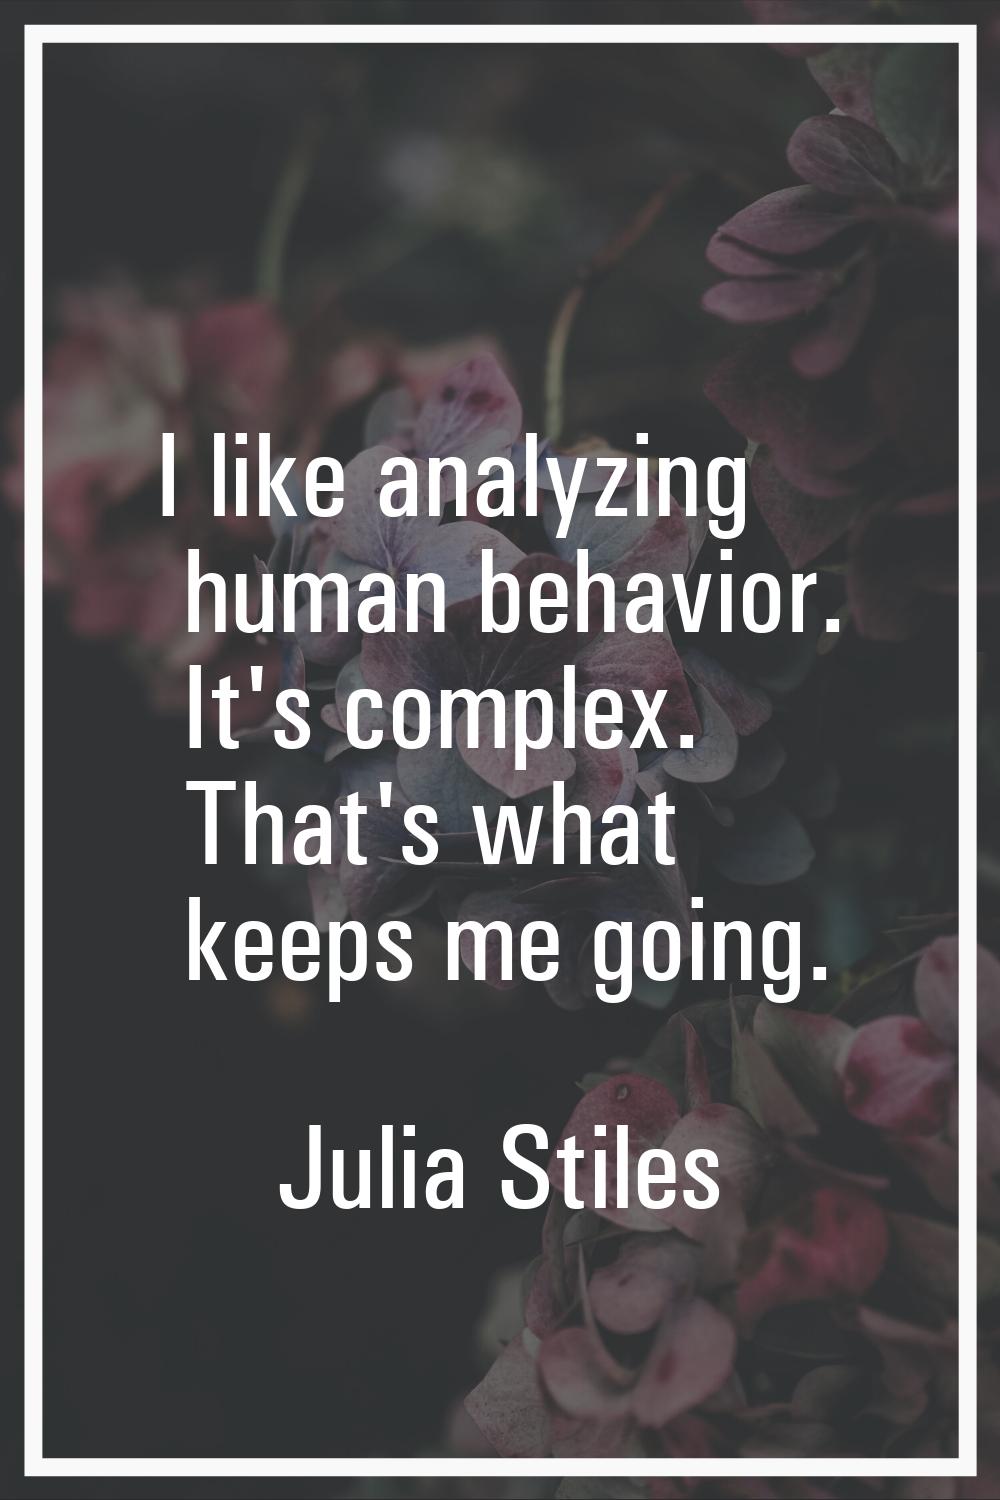 I like analyzing human behavior. It's complex. That's what keeps me going.